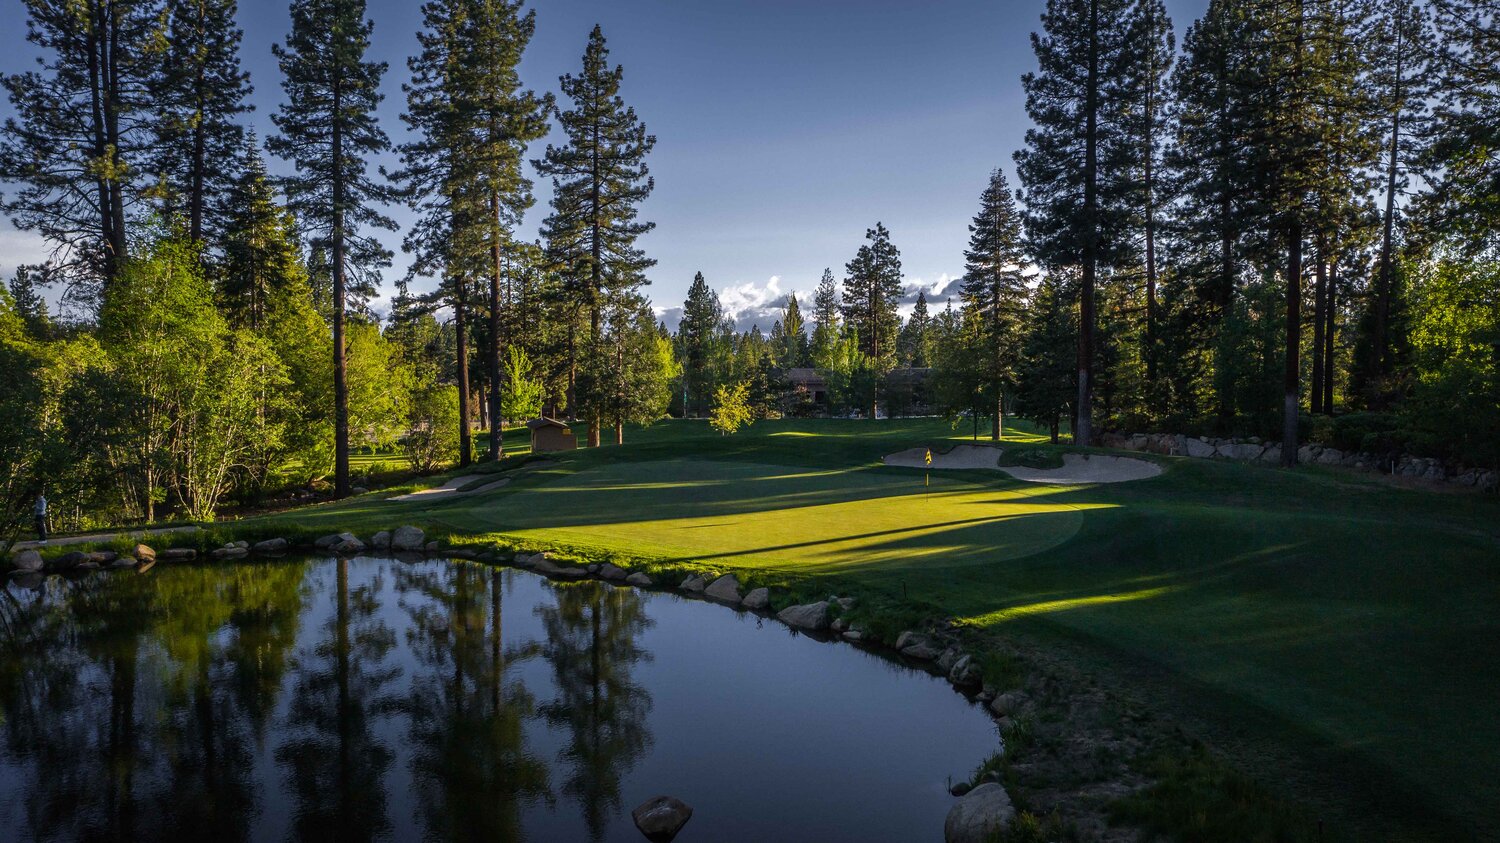 The Official Lake Tahoe Golf Guide — PJKoenig Golf Photography PJKoenig Golf Photography - Golf Photos For Those Who Love The Game.